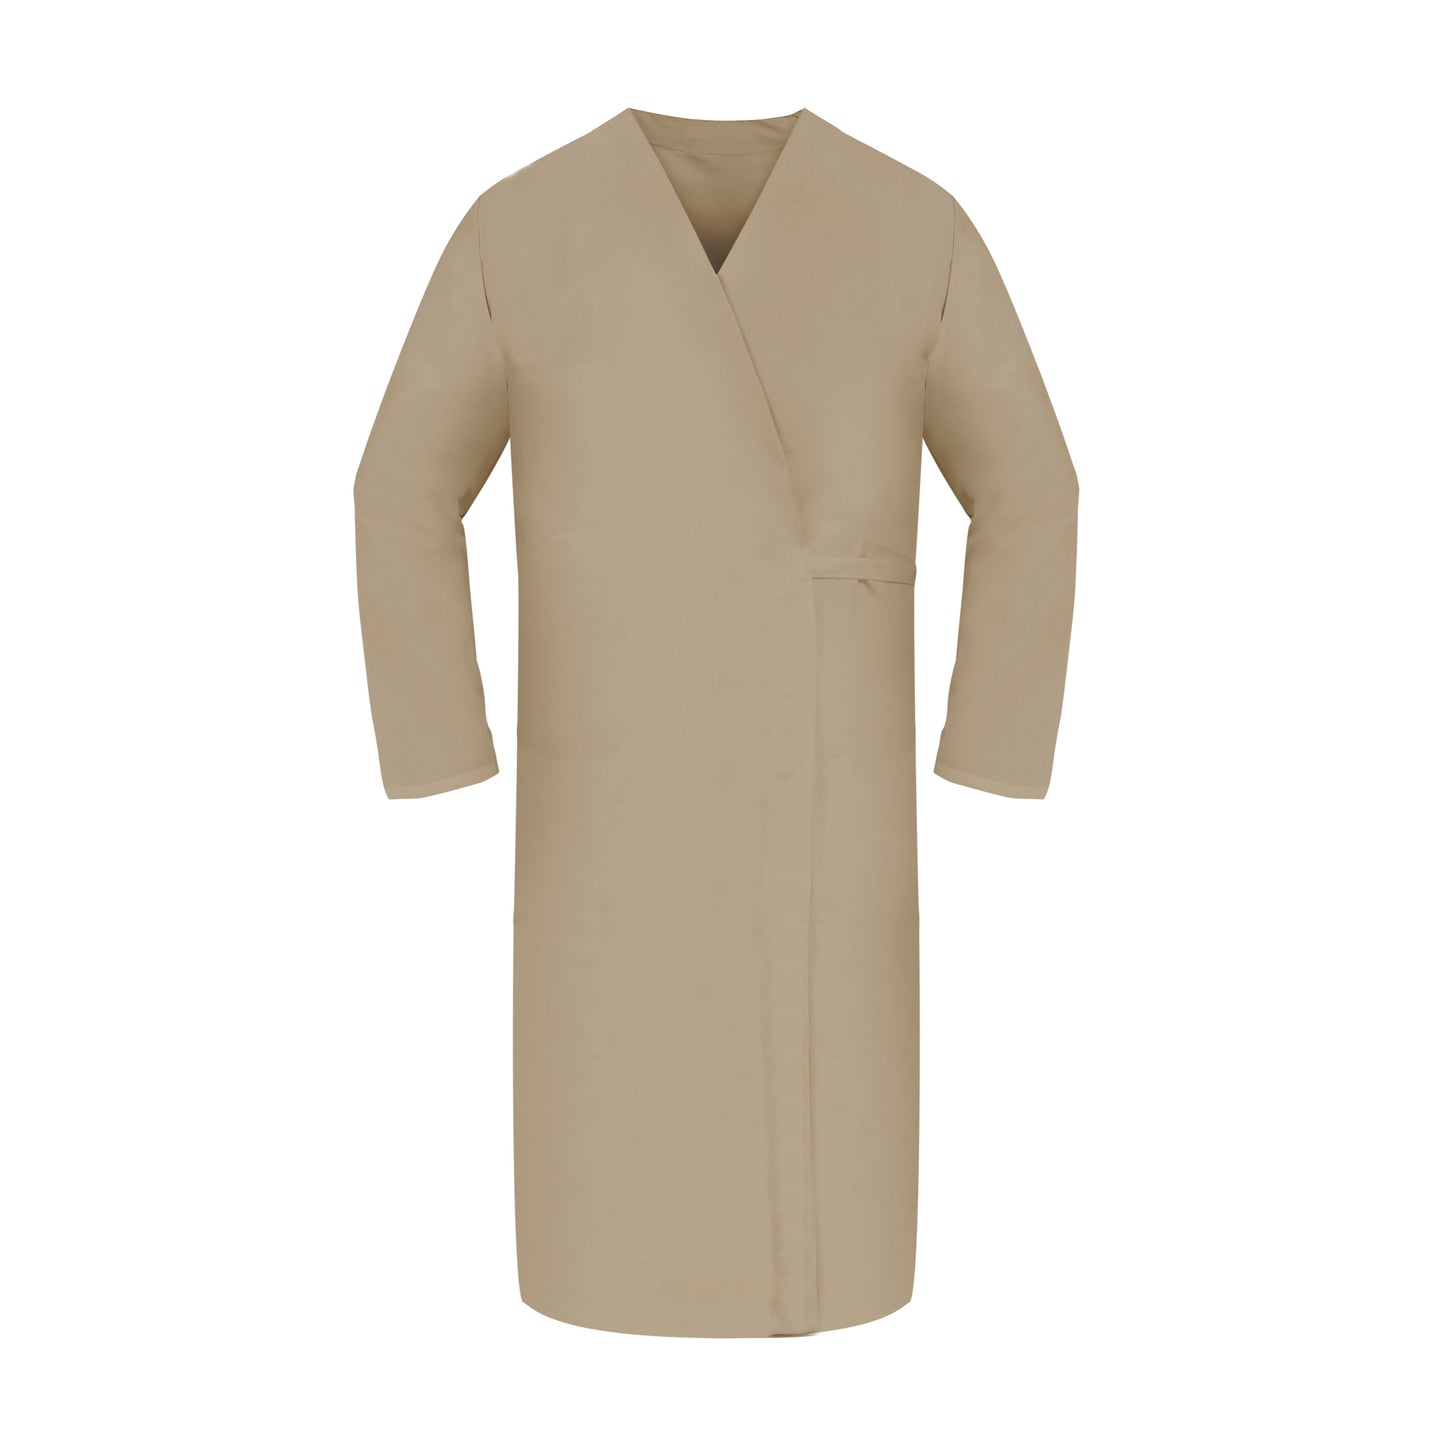 American Dawn | X-Large Tan Smock Wraps With Long Sleeves And No Pockets